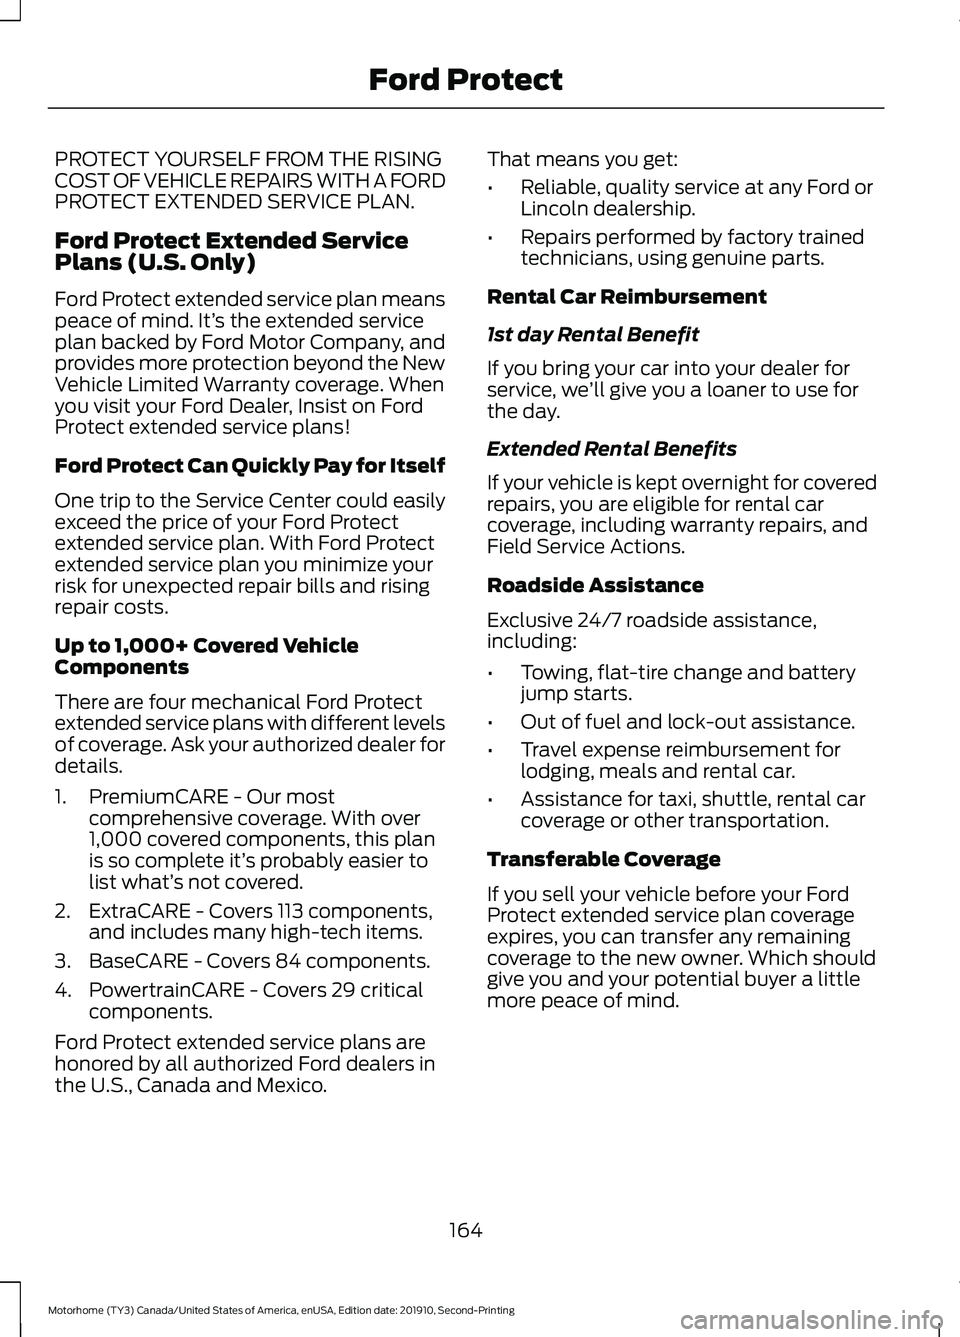 FORD F-53 2020  Owners Manual PROTECT YOURSELF FROM THE RISING
COST OF VEHICLE REPAIRS WITH A FORD
PROTECT EXTENDED SERVICE PLAN.
Ford Protect Extended Service
Plans (U.S. Only)
Ford Protect extended service plan means
peace of mi